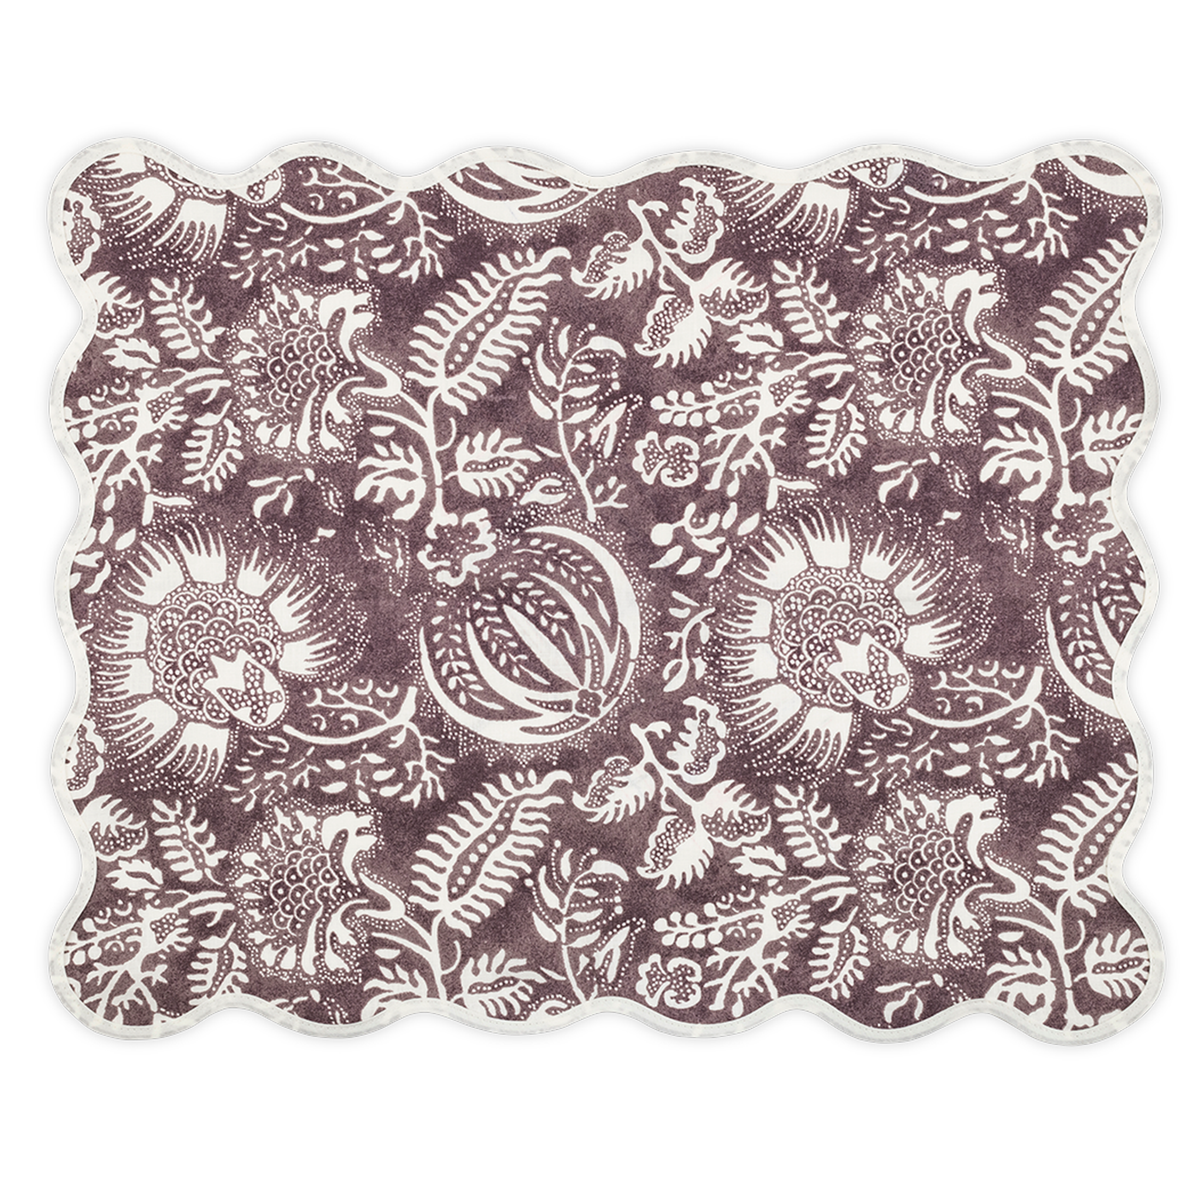 Silo Image of Matouk Granada Table Oblong Placemat in Thistle Color